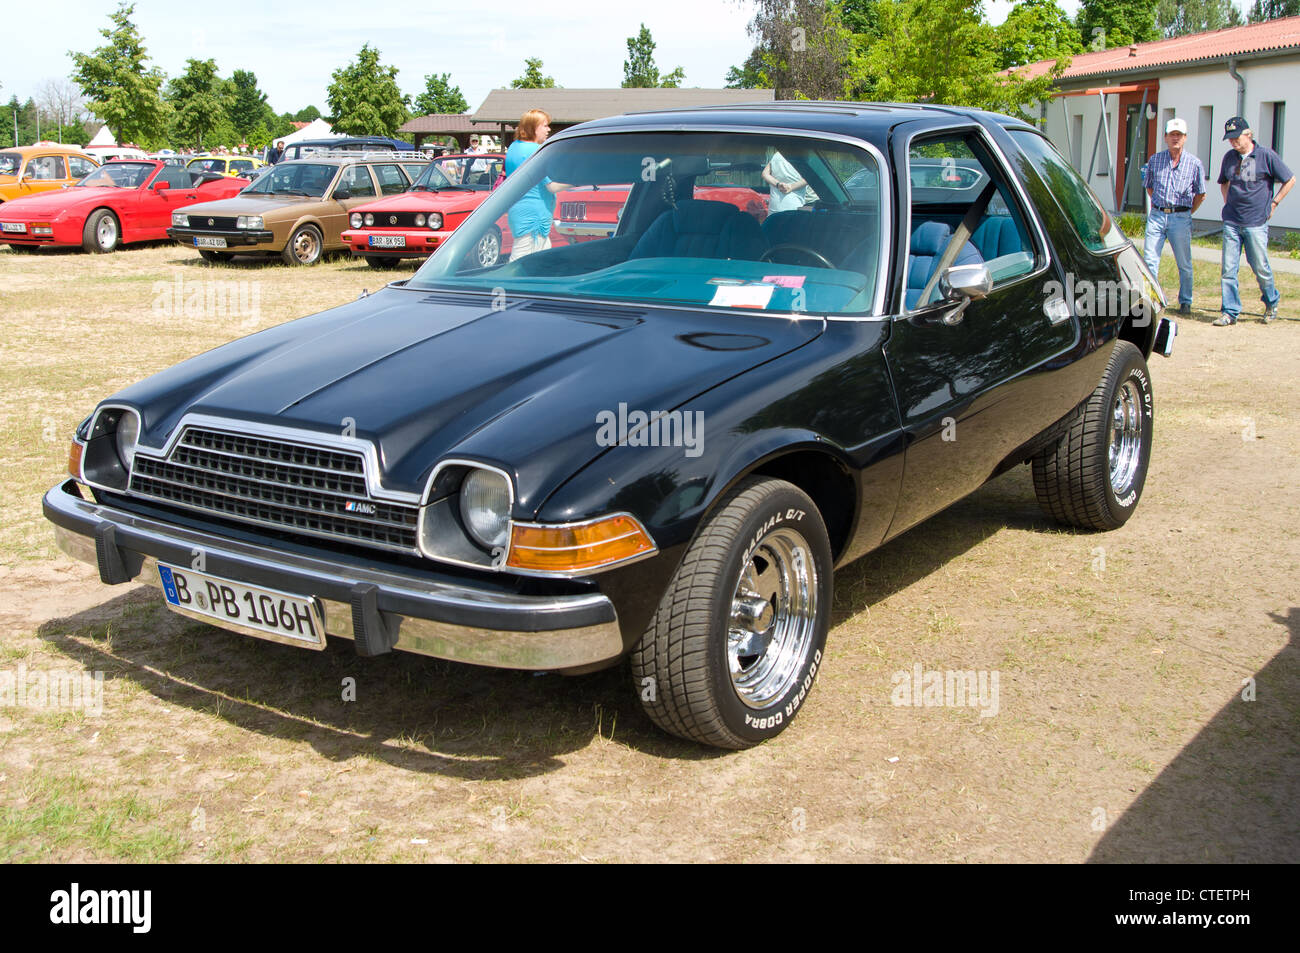 PAAREN IM GLIEN, GERMANY - MAY 26: Car AMC Pacer coupe, 'The oldtimer show' in MAFZ, May 26, 2012 in Paaren im Glien, Germany Stock Photo